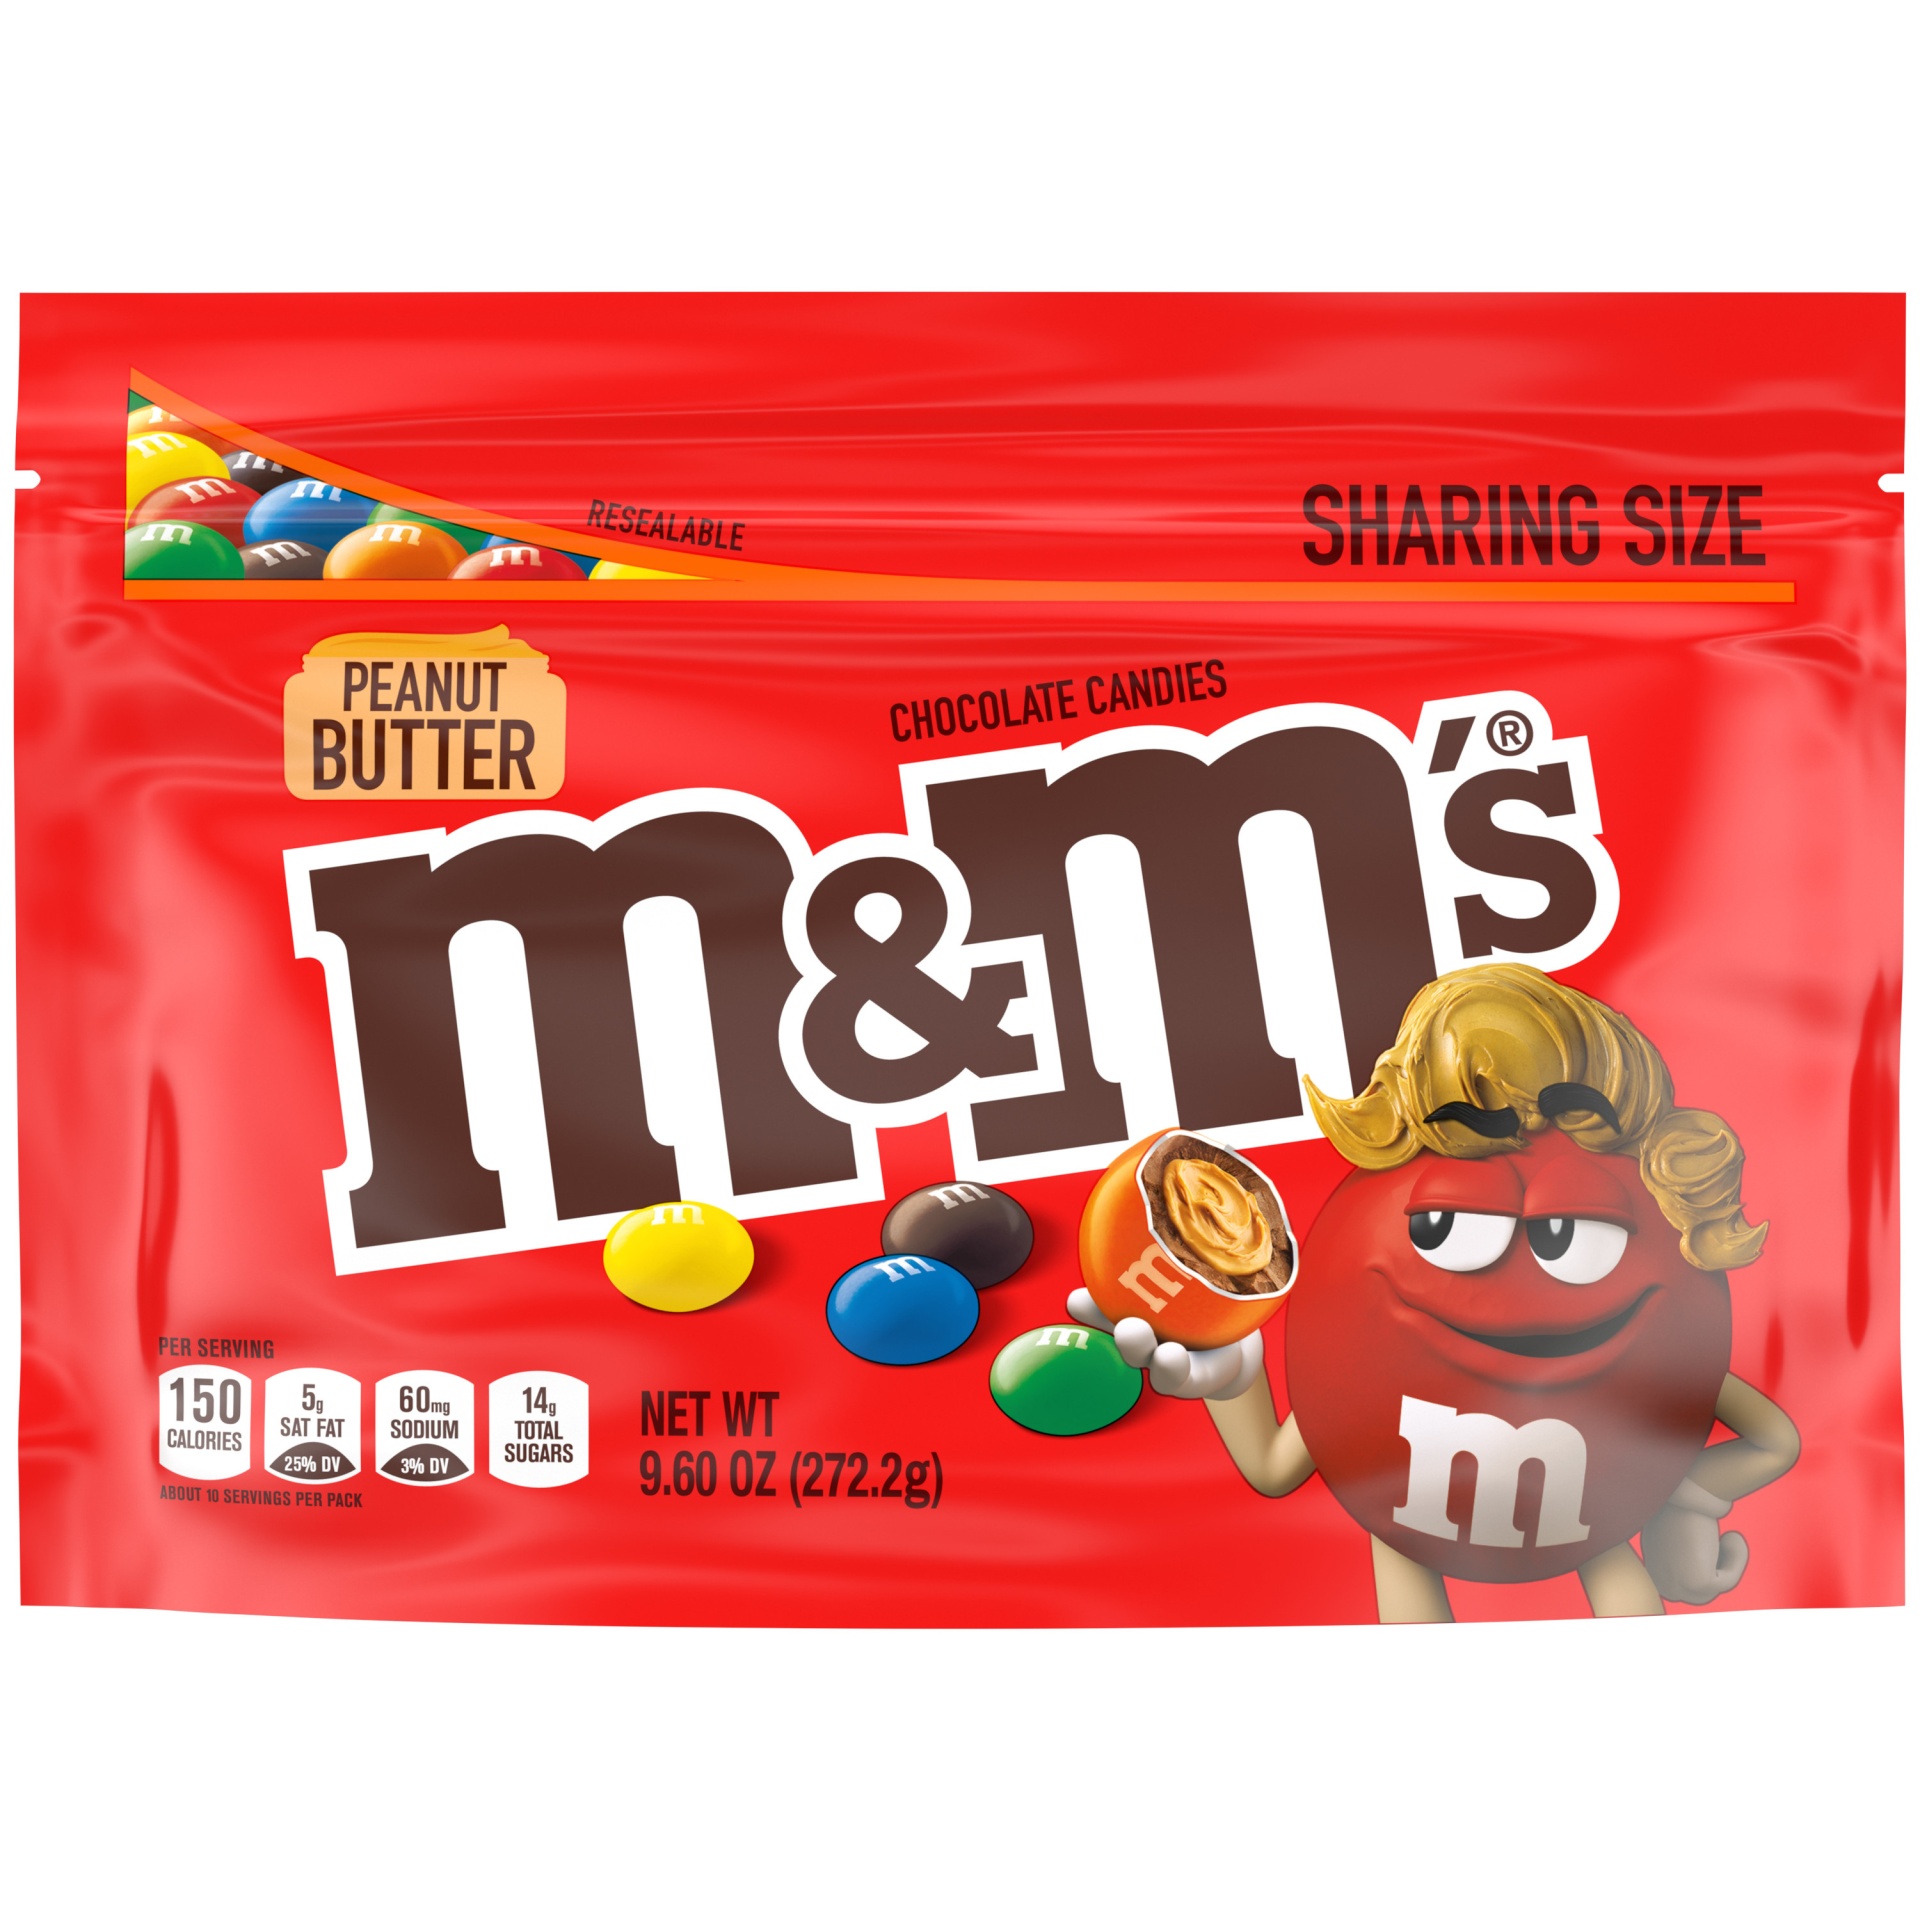 slide 1 of 8, M&M's Peanut Butter Chocolate Candies - Sharing Size - 9.6oz, 9.6 oz